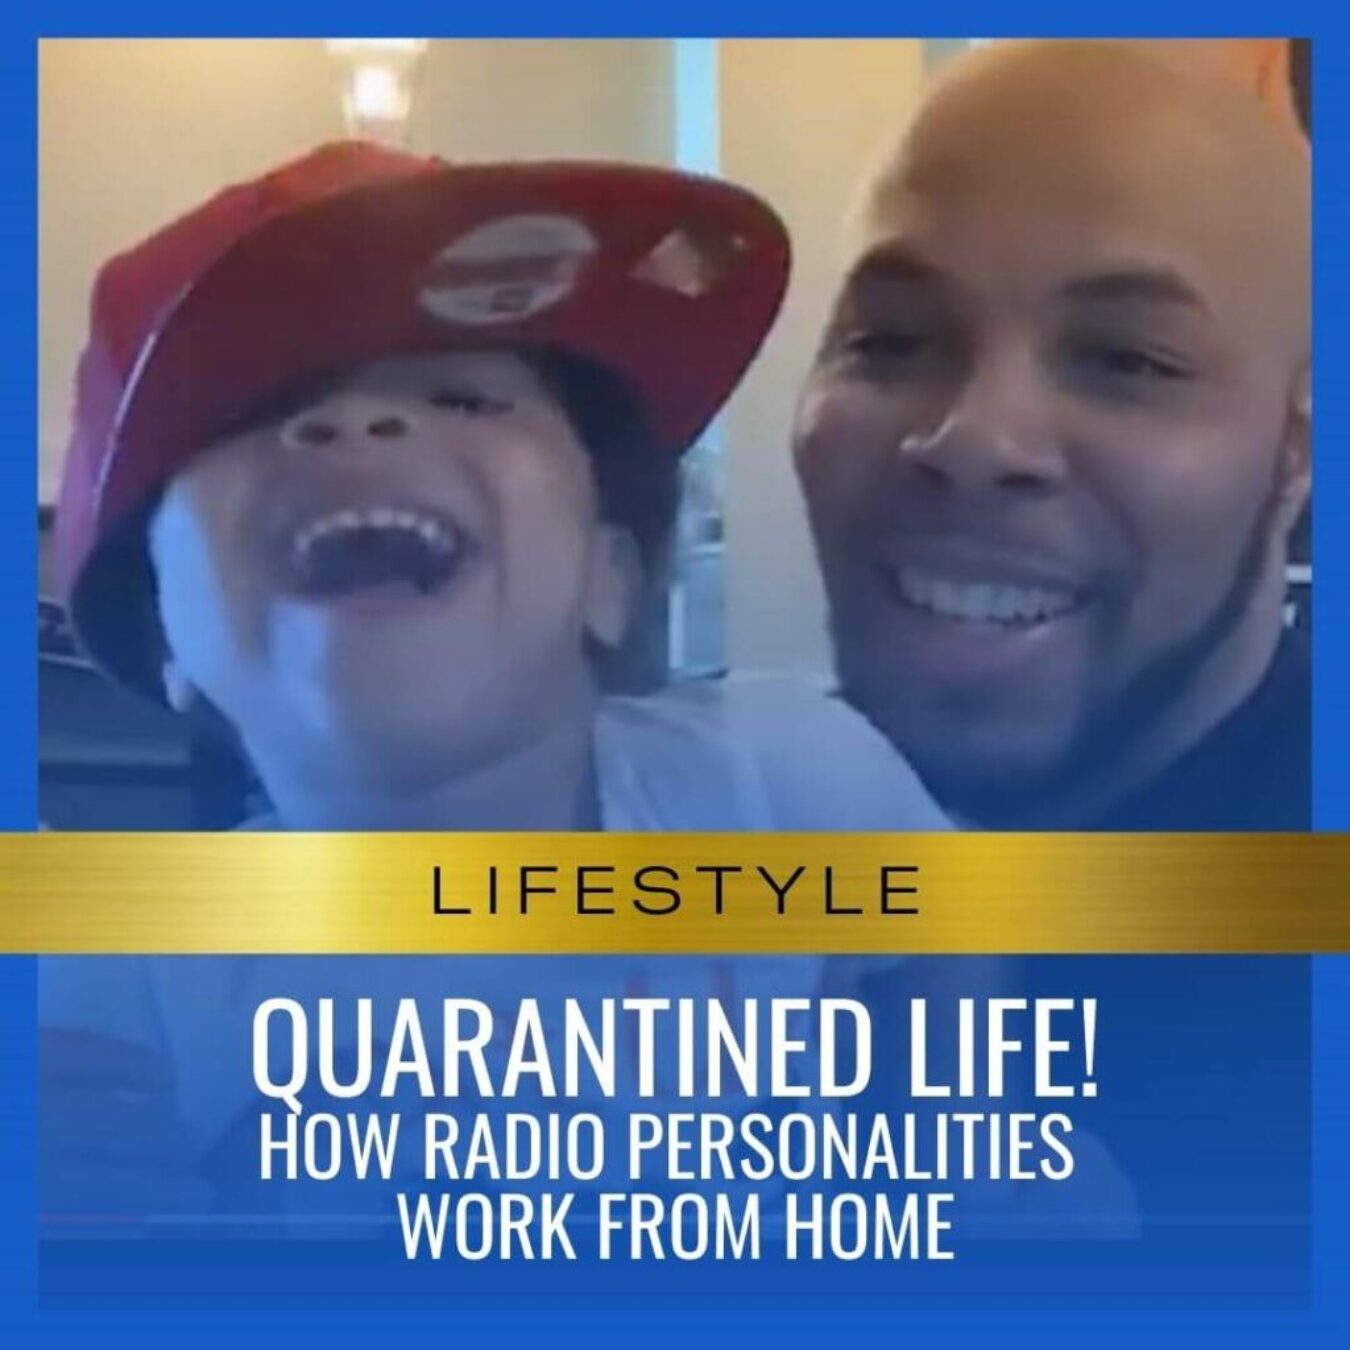 Quarantined Life! How Radio personalities Work From Home